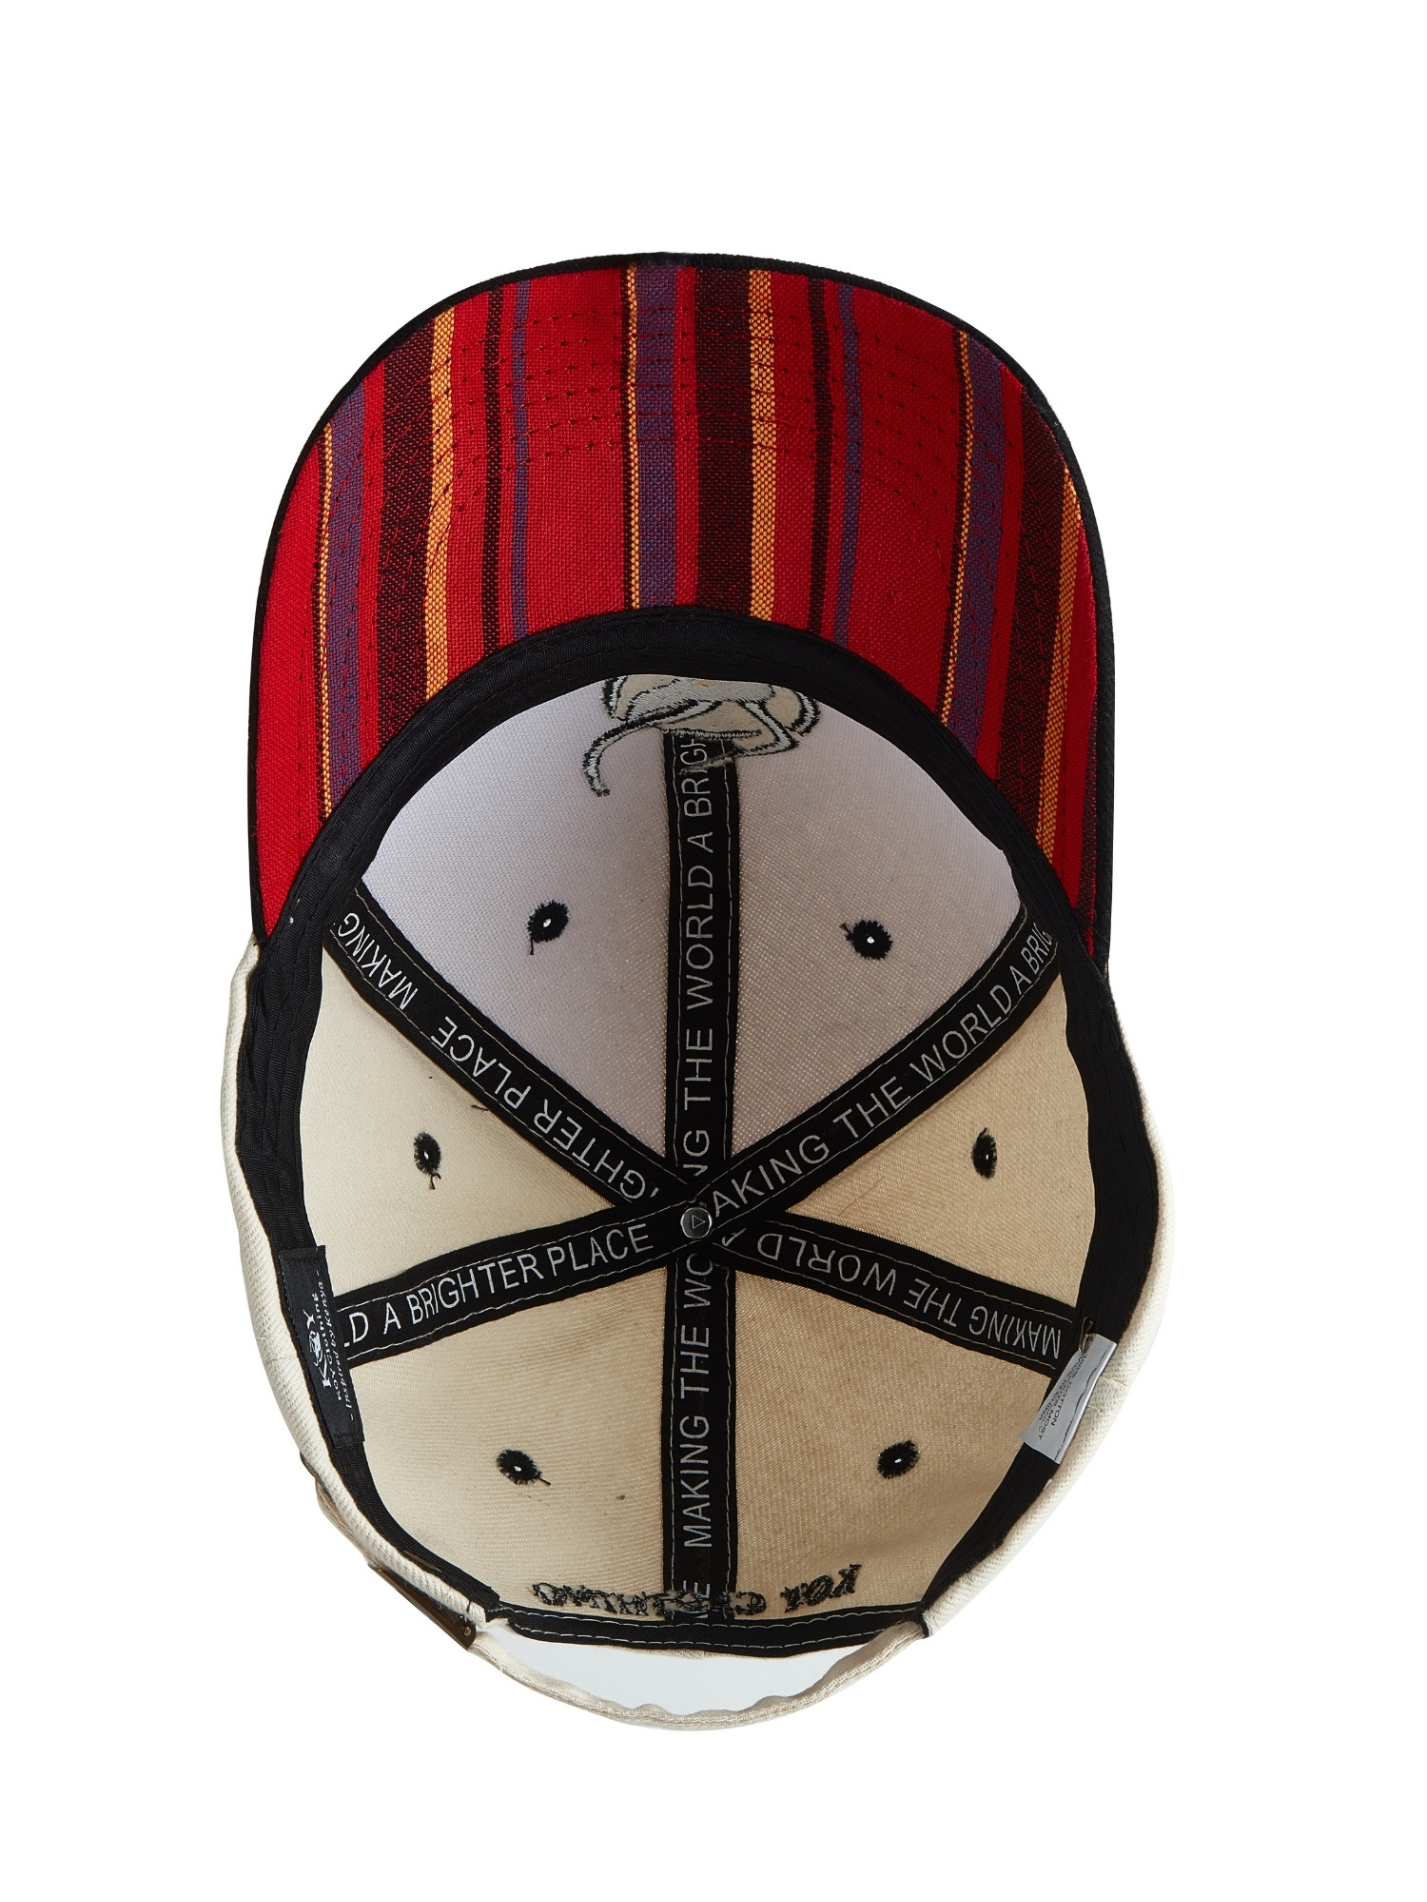 Safari Beige Cotton Cap - Maasai-Red striped Kenyan Kikoy fabric detailing under the peak - Traditional baseball style cap made from durable washed cotton twill - Signature impala head logo embroidery and embossed buckle